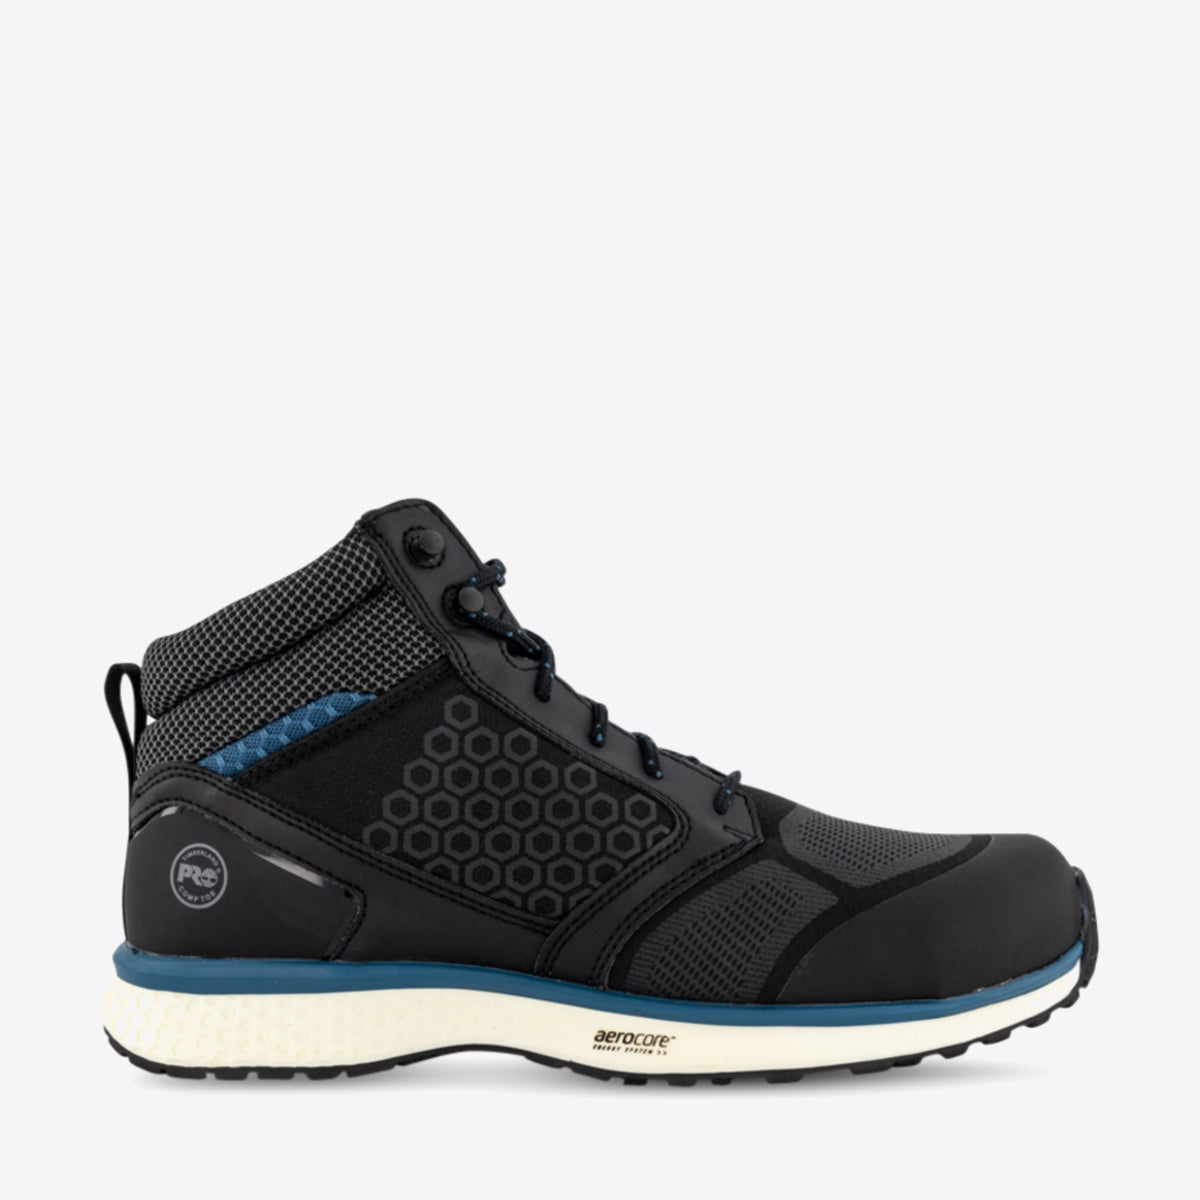 TIMBERLAND PRO Reaxion Mid Black/Blue - Image 1